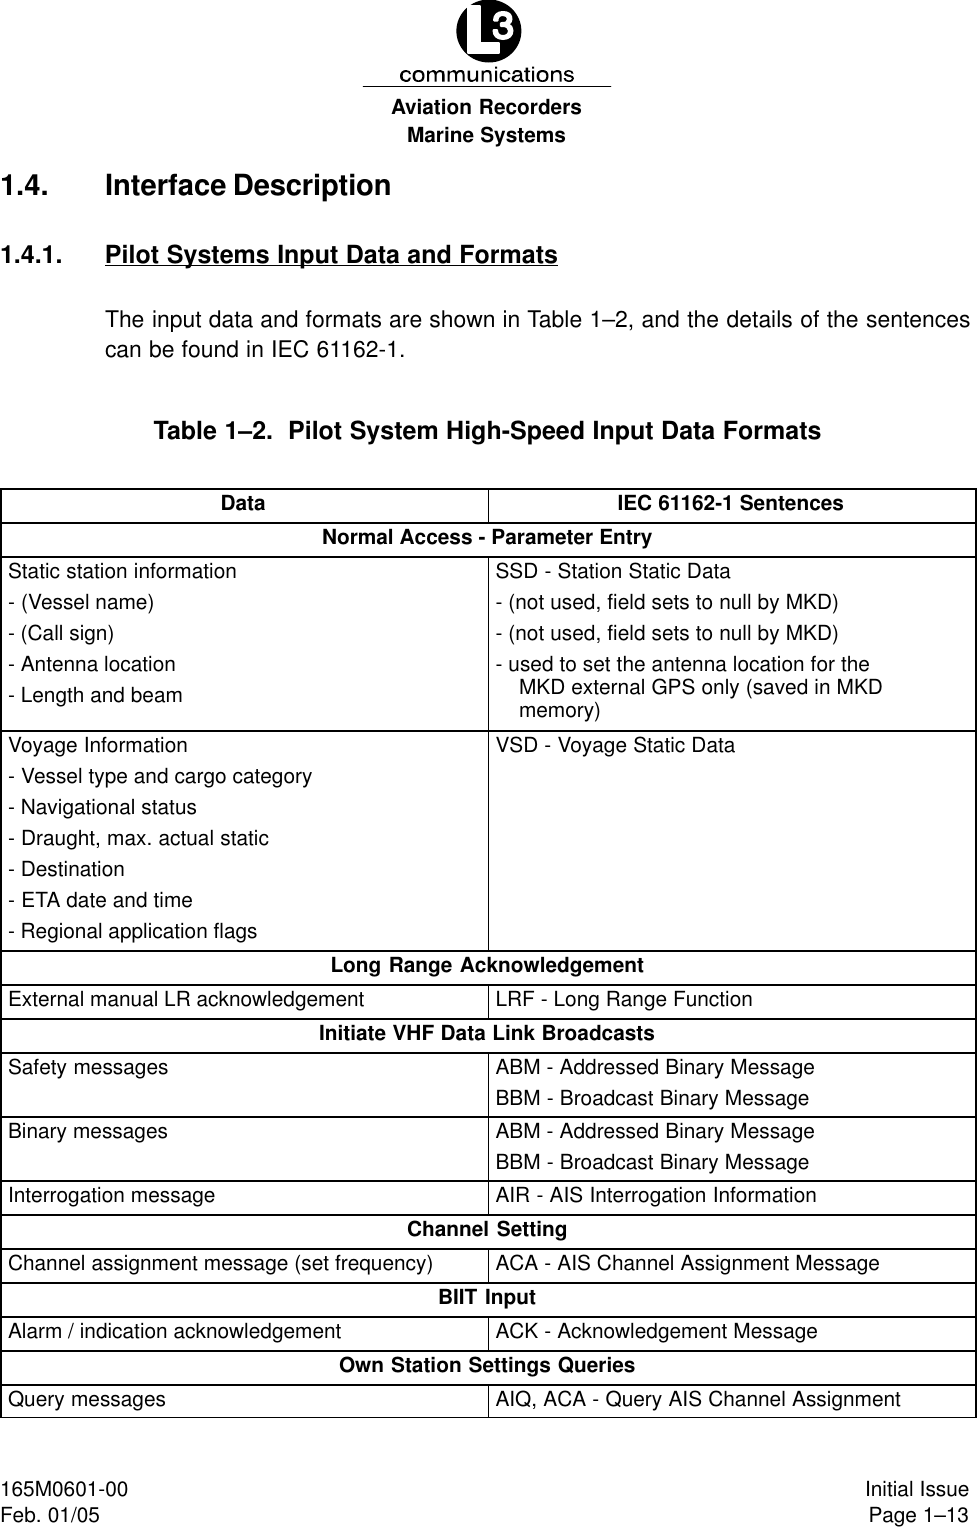 Marine SystemsAviation RecordersPage 1–13Initial Issue165M0601-00Feb. 01/051.4. Interface Description1.4.1. Pilot Systems Input Data and FormatsThe input data and formats are shown in Table 1–2, and the details of the sentencescan be found in IEC 61162-1.Table 1–2.  Pilot System High-Speed Input Data FormatsData IEC 61162-1 SentencesNormal Access - Parameter EntryStatic station information- (Vessel name)- (Call sign)- Antenna location- Length and beamSSD - Station Static Data- (not used, field sets to null by MKD)- (not used, field sets to null by MKD)- used to set the antenna location for theMKD external GPS only (saved in MKDmemory)Voyage Information- Vessel type and cargo category- Navigational status- Draught, max. actual static- Destination- ETA date and time- Regional application flagsVSD - Voyage Static DataLong Range AcknowledgementExternal manual LR acknowledgement LRF - Long Range FunctionInitiate VHF Data Link BroadcastsSafety messages ABM - Addressed Binary MessageBBM - Broadcast Binary MessageBinary messages ABM - Addressed Binary MessageBBM - Broadcast Binary MessageInterrogation message AIR - AIS Interrogation InformationChannel SettingChannel assignment message (set frequency) ACA - AIS Channel Assignment MessageBIIT InputAlarm / indication acknowledgement ACK - Acknowledgement MessageOwn Station Settings QueriesQuery messages AIQ, ACA - Query AIS Channel Assignment